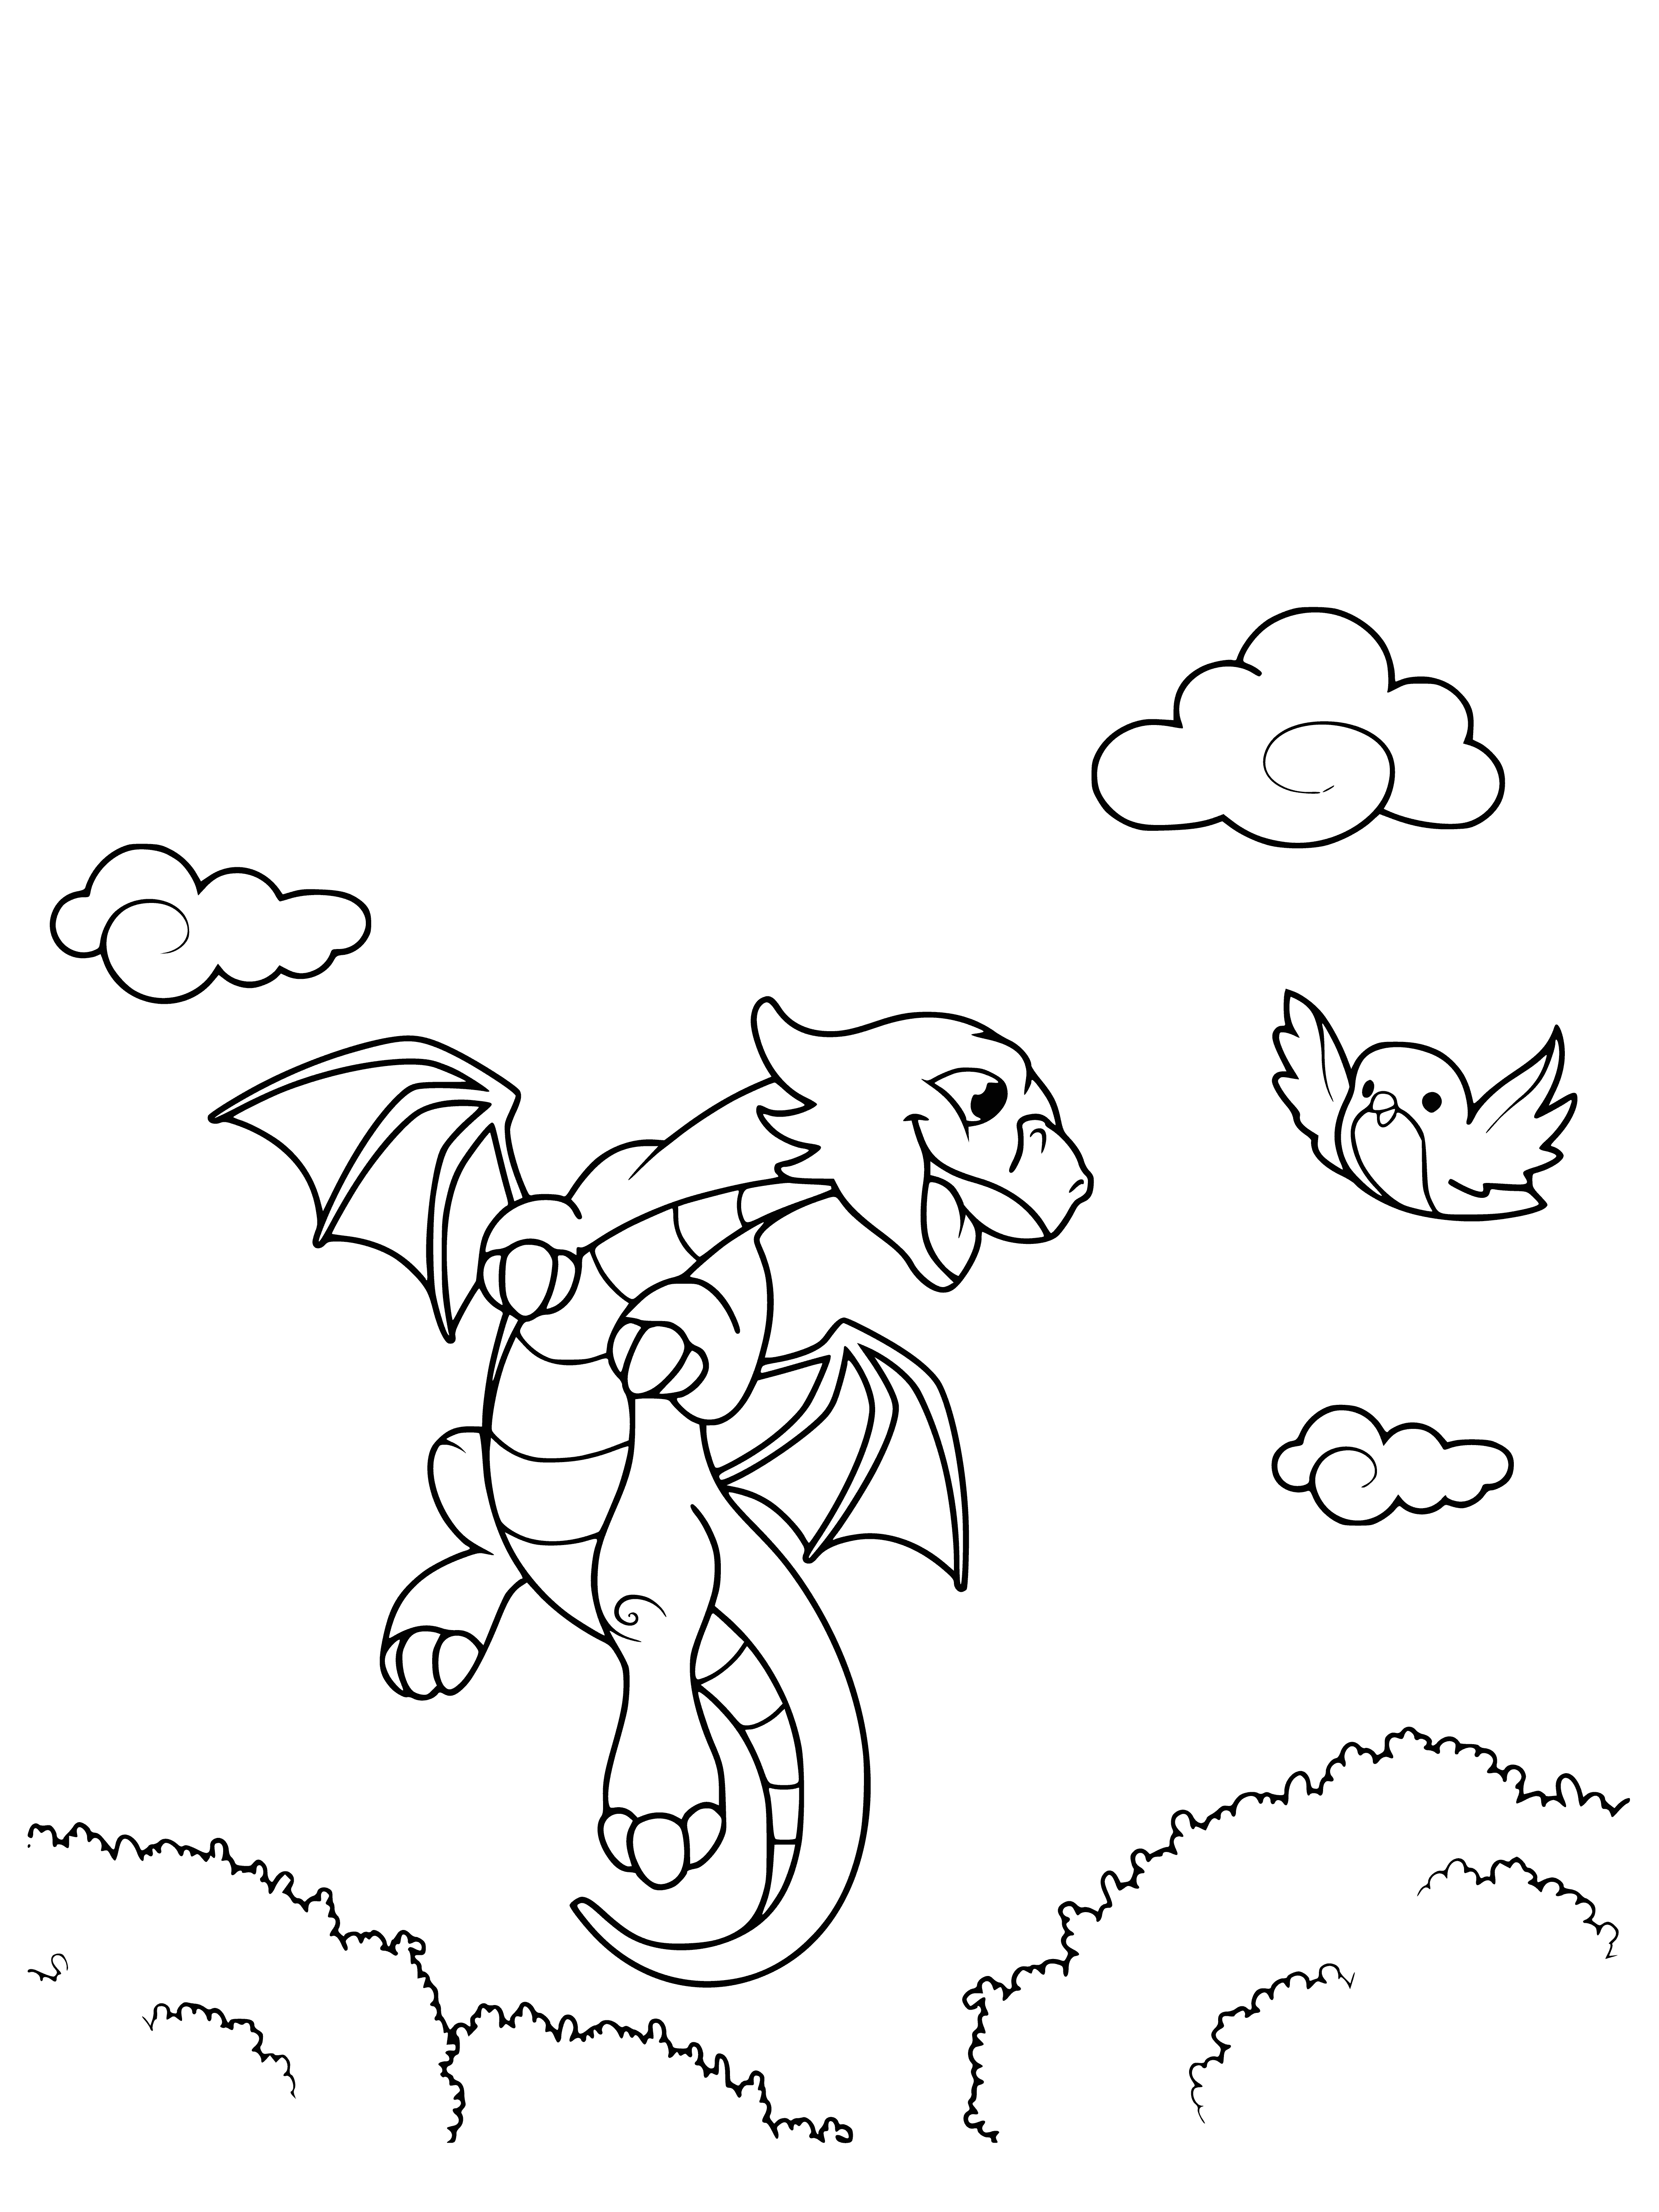 coloring page: Dragon has wings, scales, breathes fire & can fly - big & powerful.